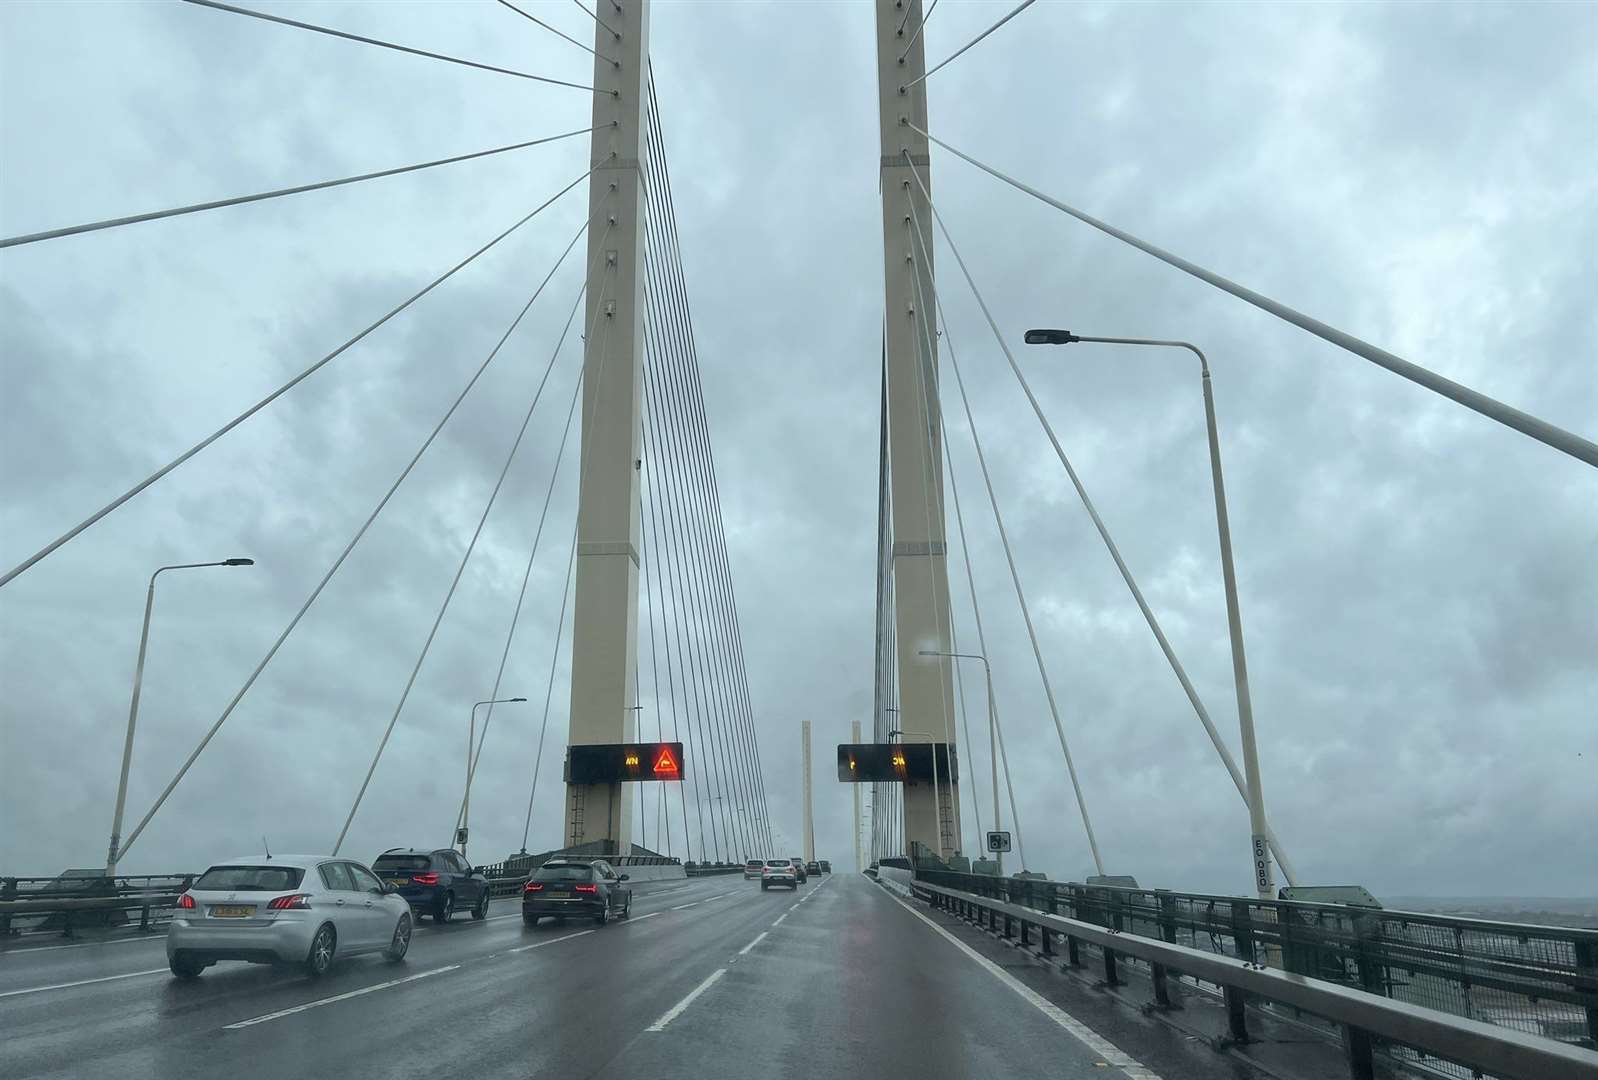 Two lanes have been closed on the QEII Bridge due to strong winds